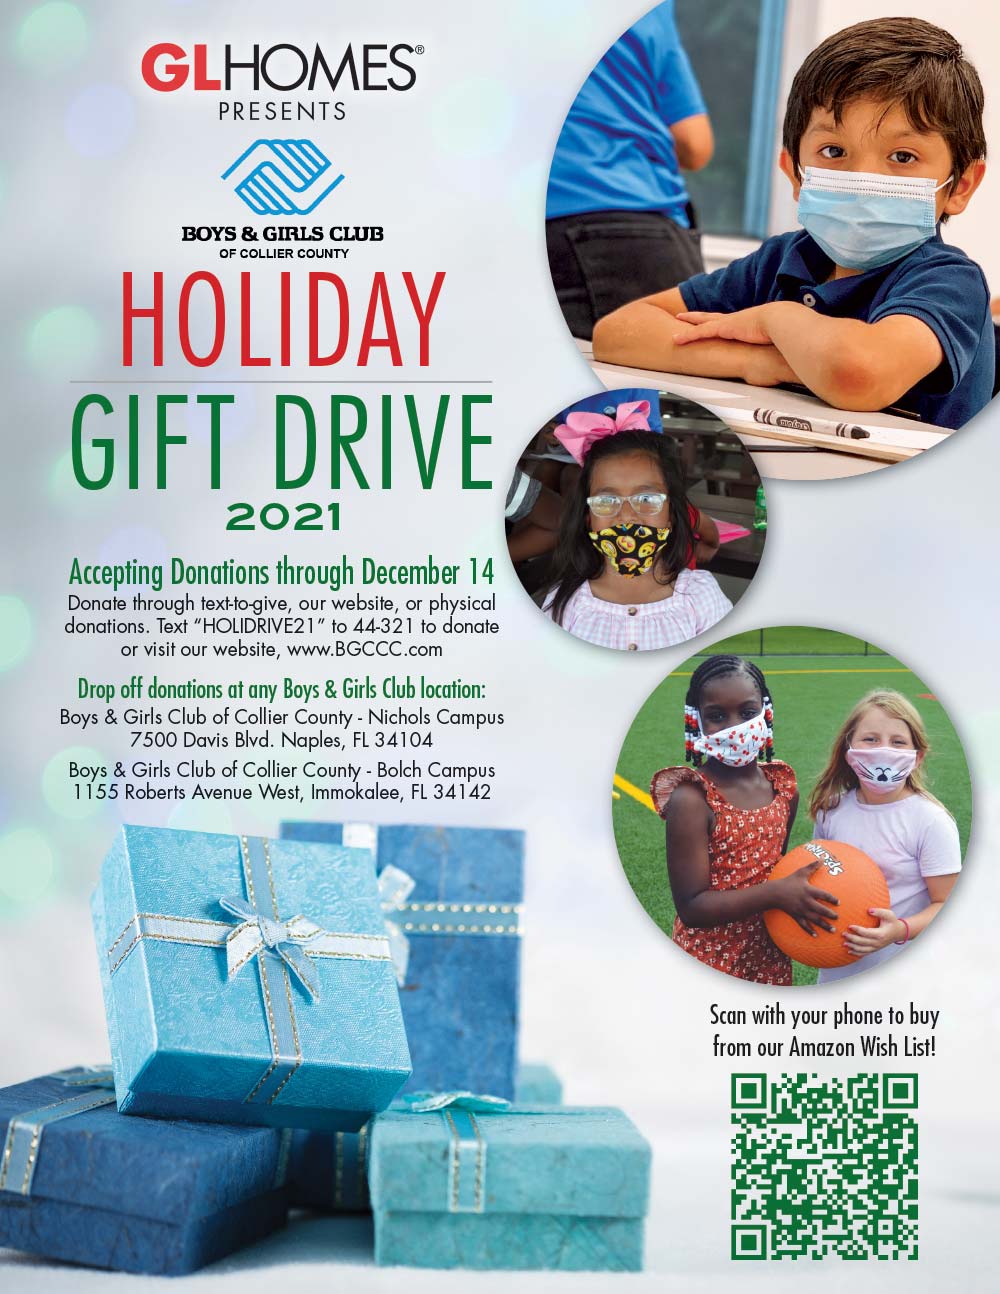 GL Homes Holiday Drive with Boys & Girls Club of Collier County